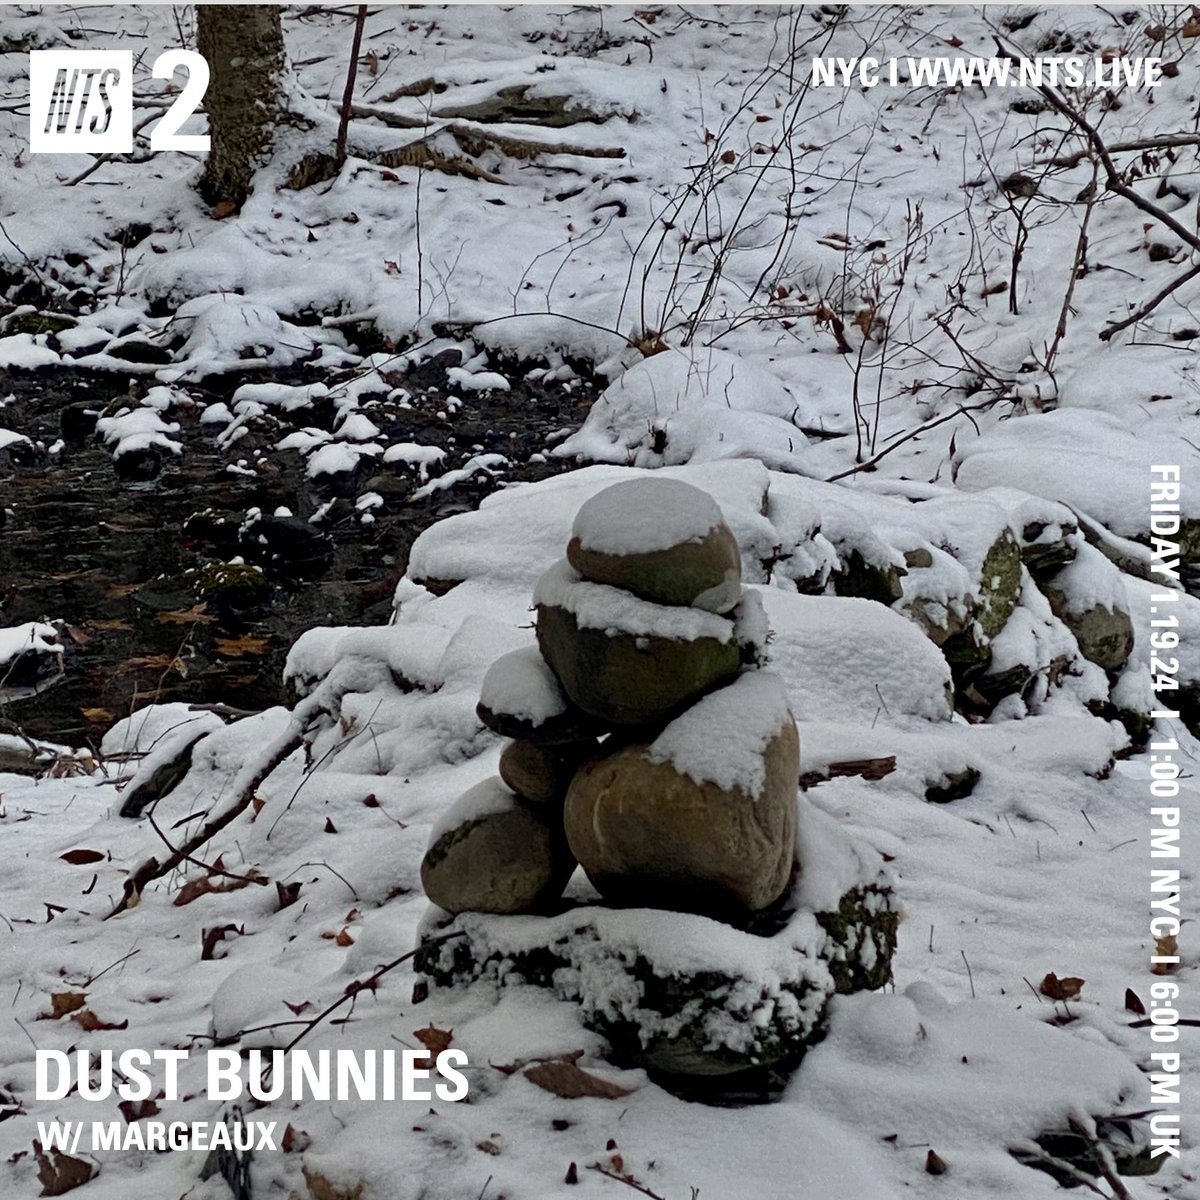 Winter Warmers with Margeaux for the next hour - Dust Bunnies on nts.live/2